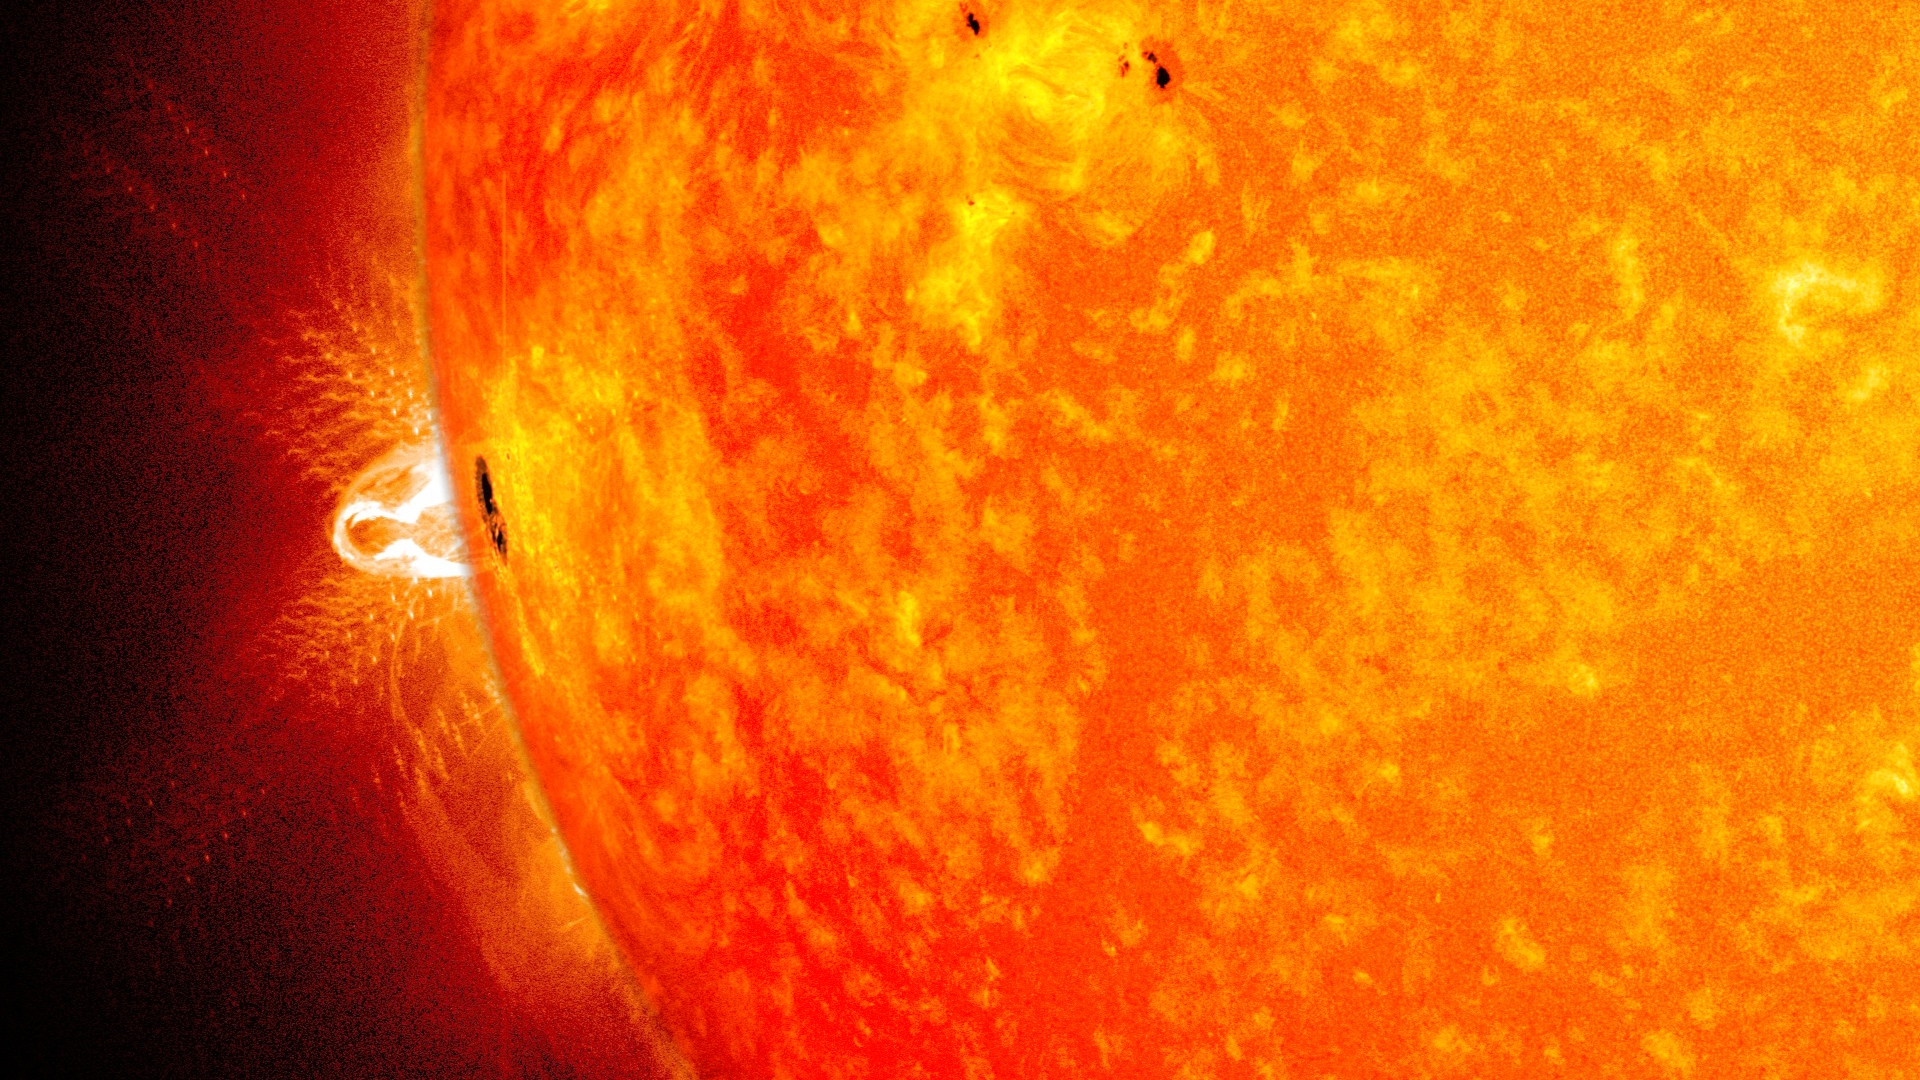 Preview Image for Giant Sunspot Makes Third Trip Across the Sun